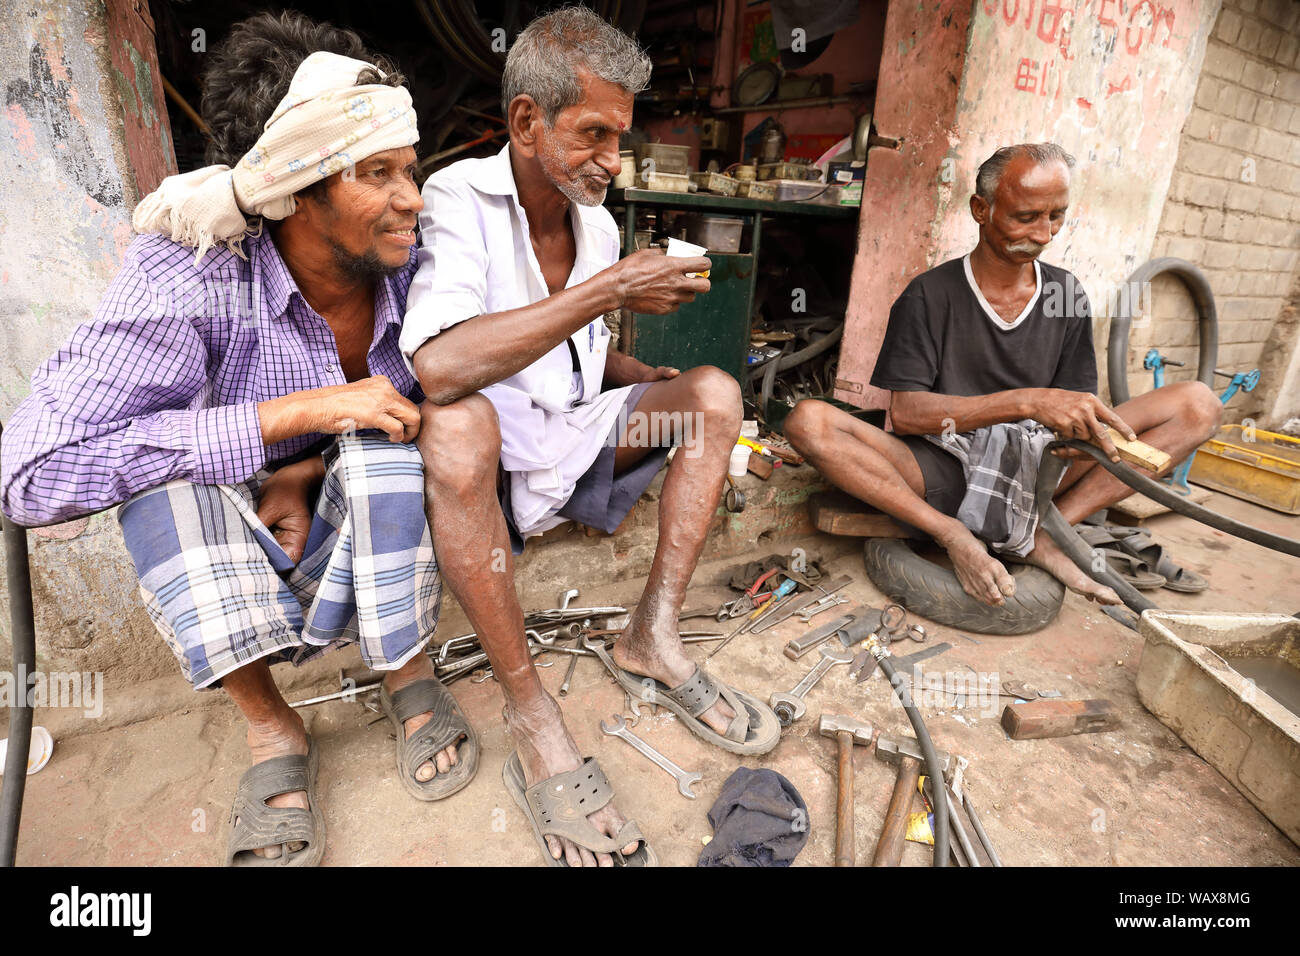 A group of workers in the streets of Madurai, India Stock Photo